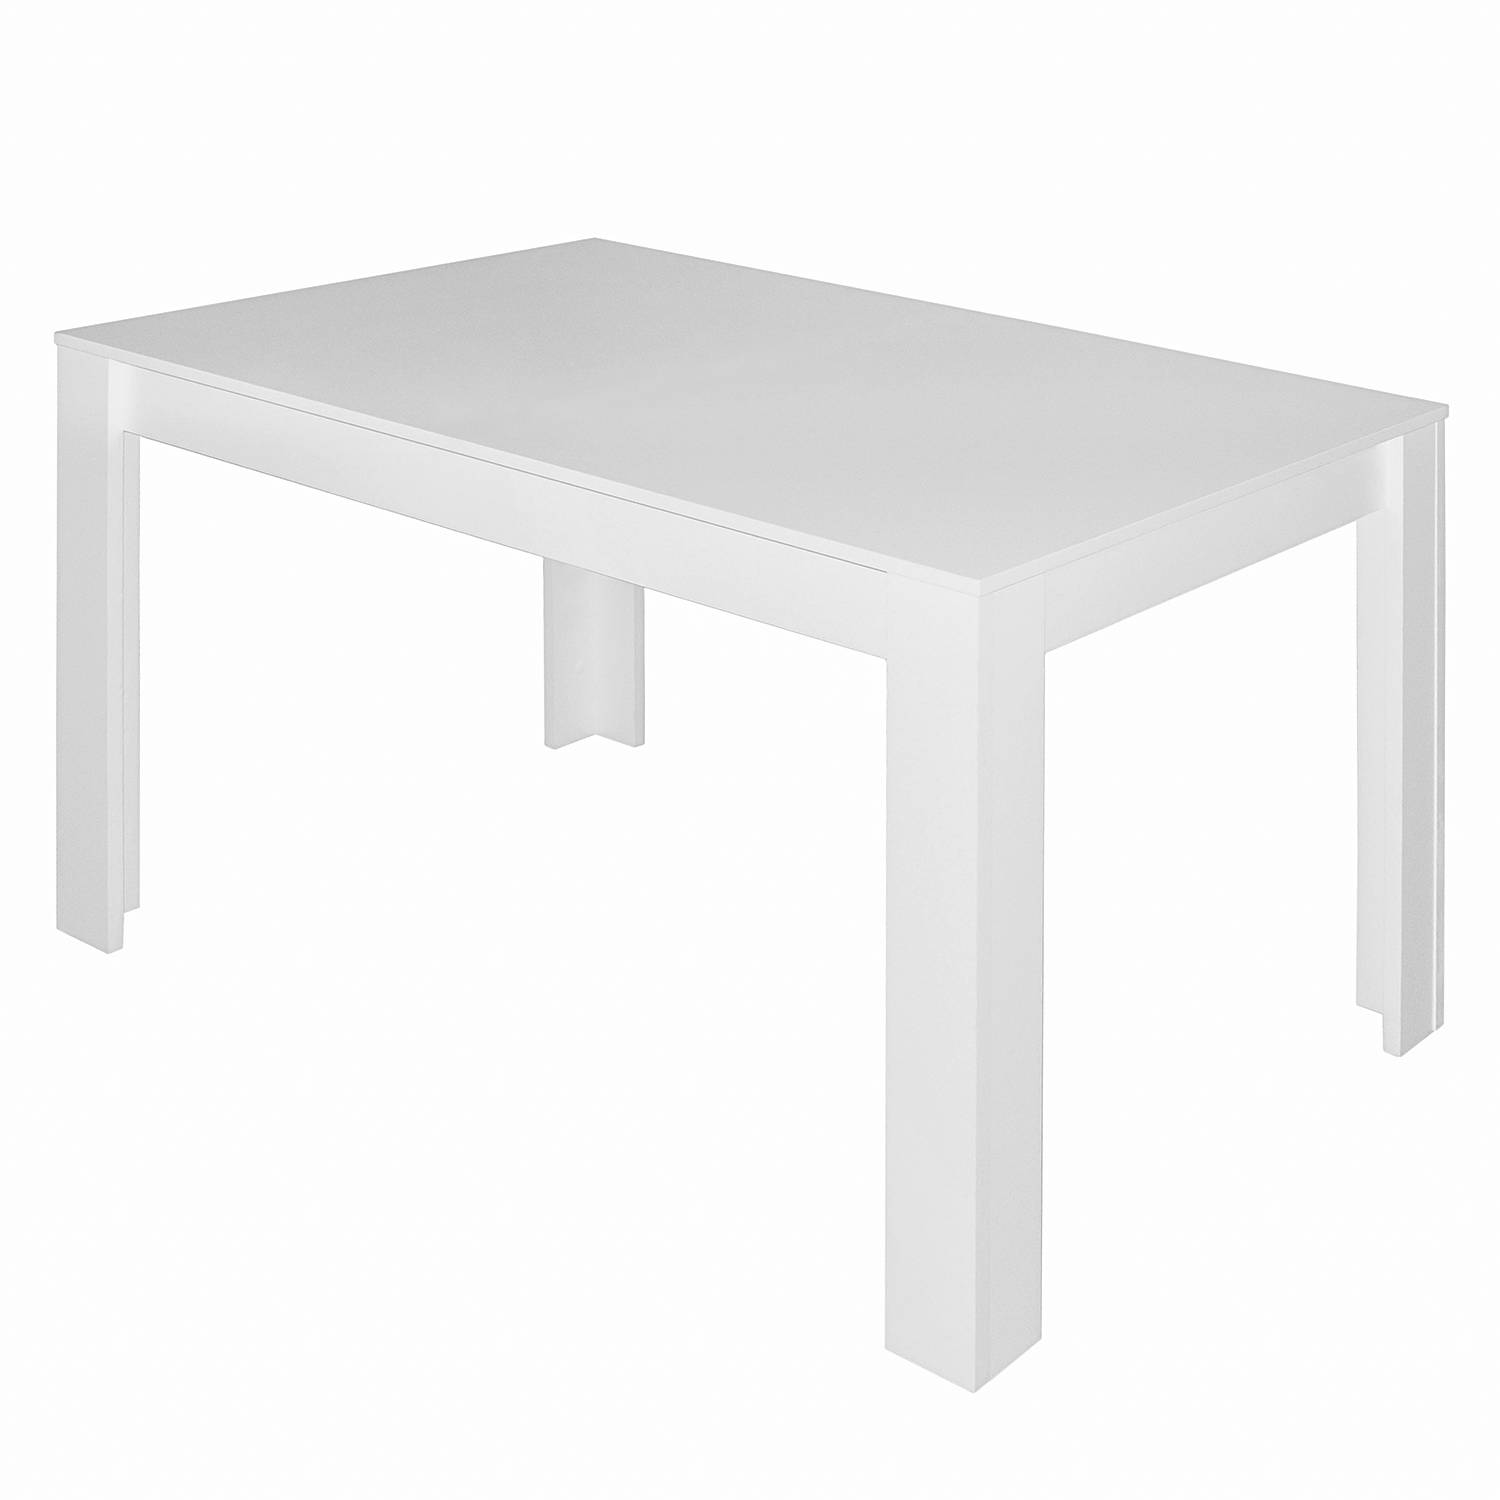 Image of Table Fairford 000000001000121334